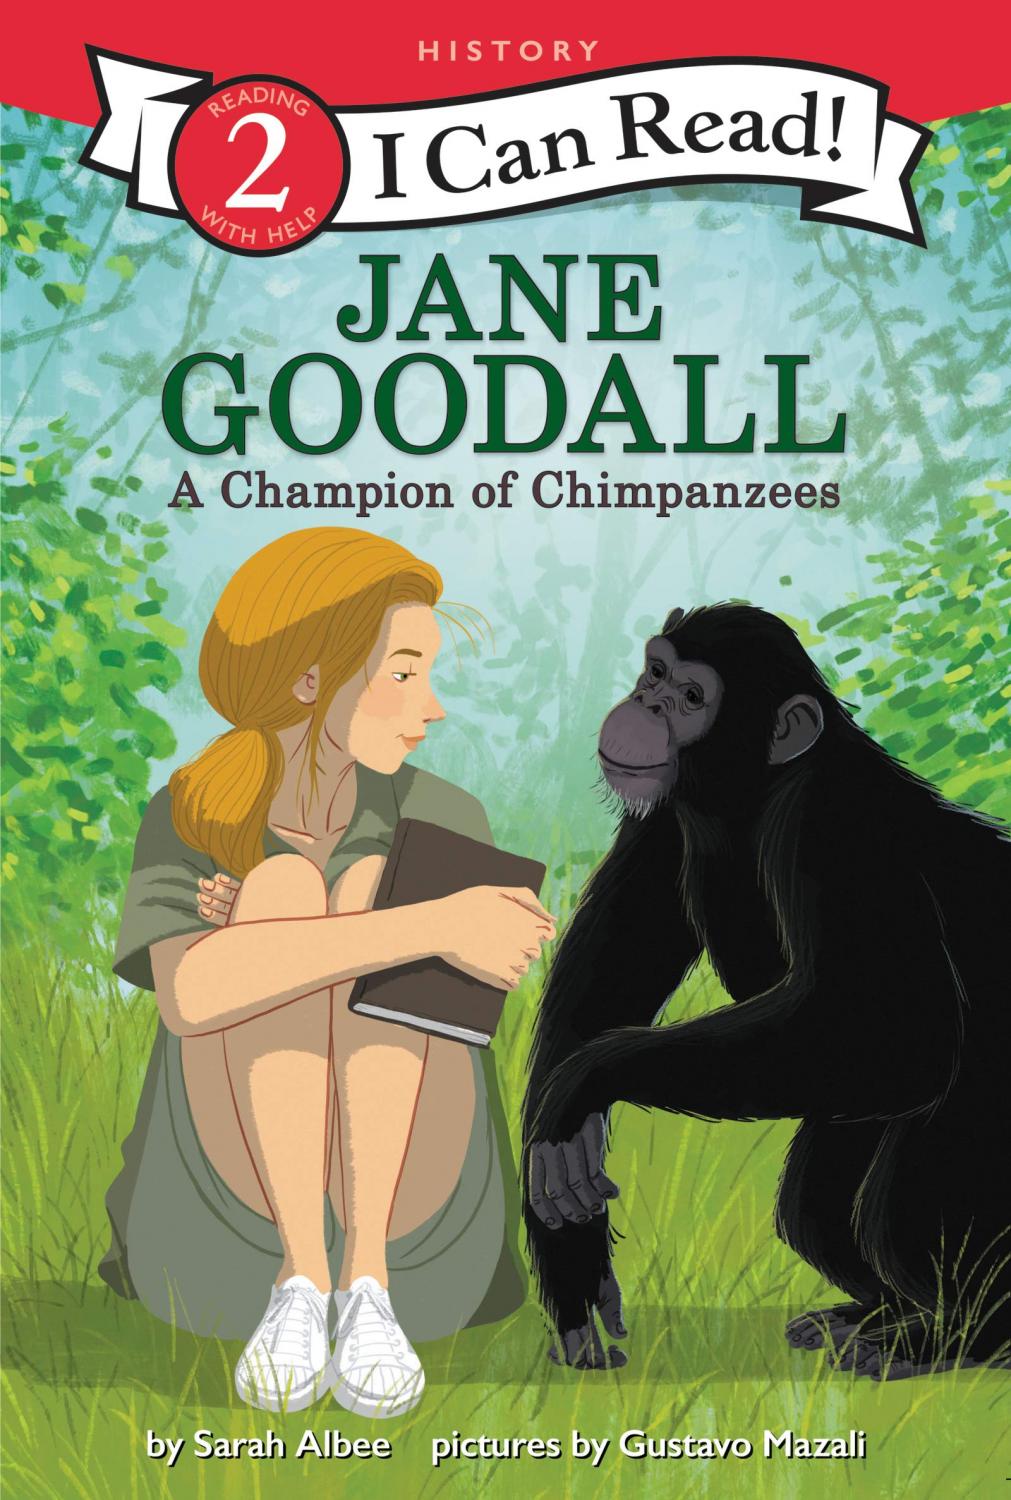 Illustration of a young woman sitting with a chimpanzee